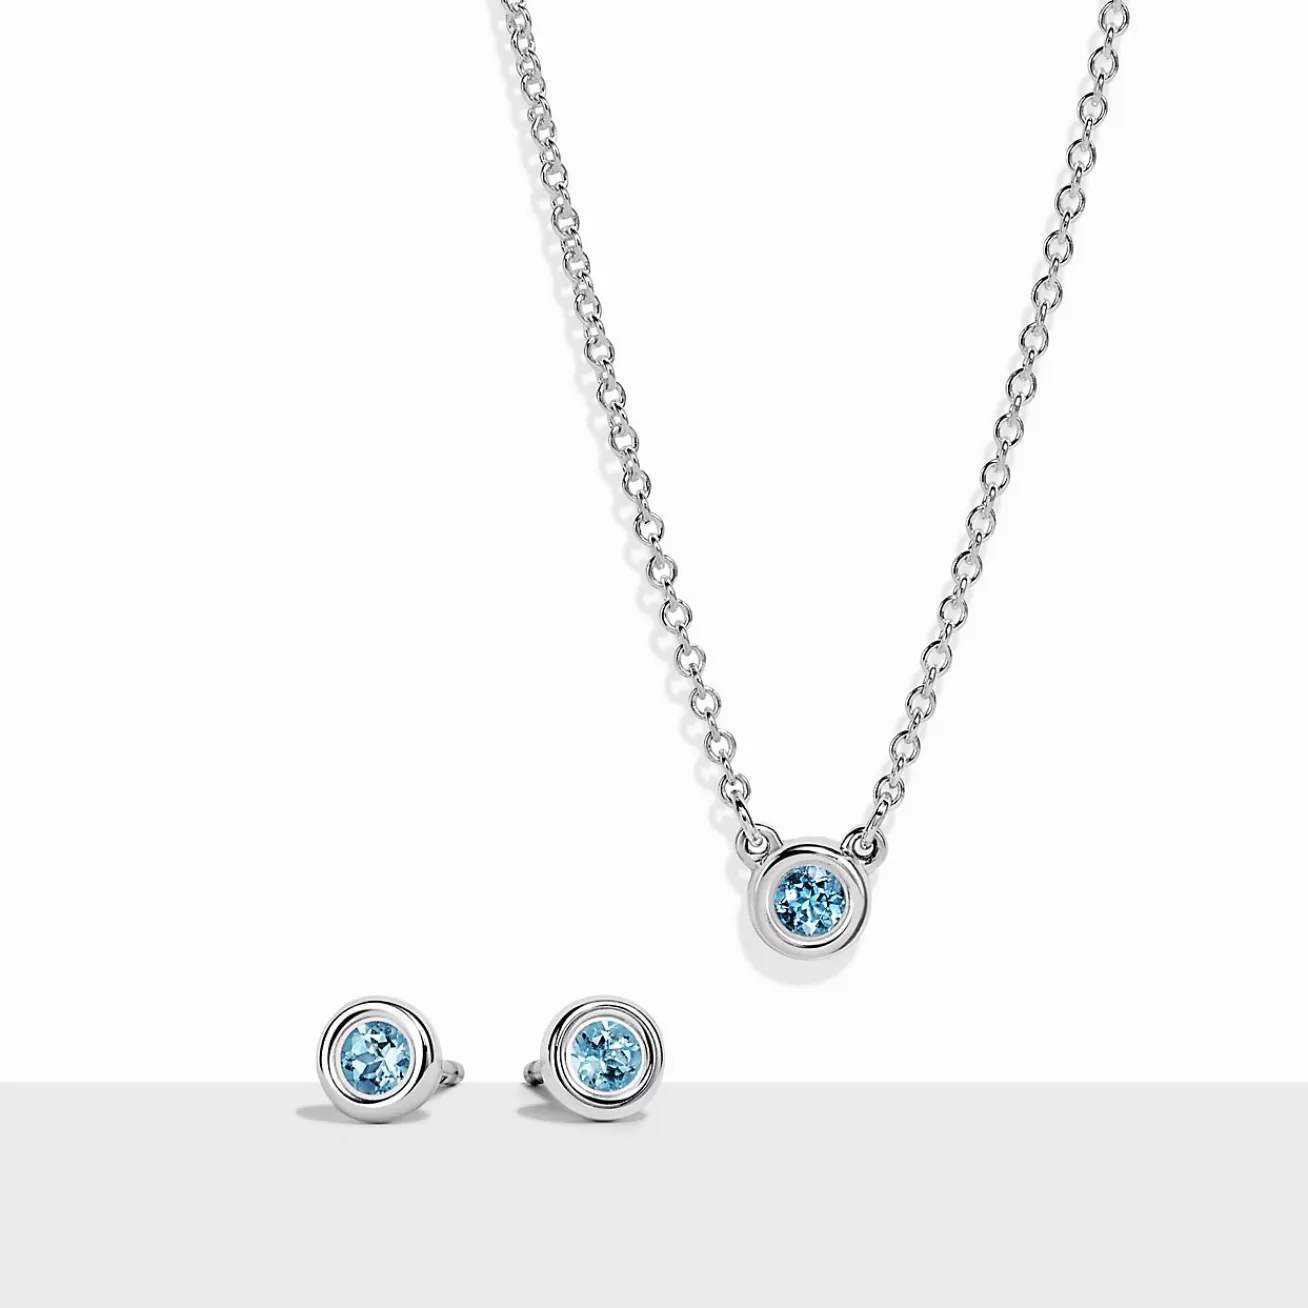 Tiffany & Co. Elsa Peretti® Color by the Yard Pendant & Earrings Set in Silver with Aquamarine | ^ Gifts for Her | Her